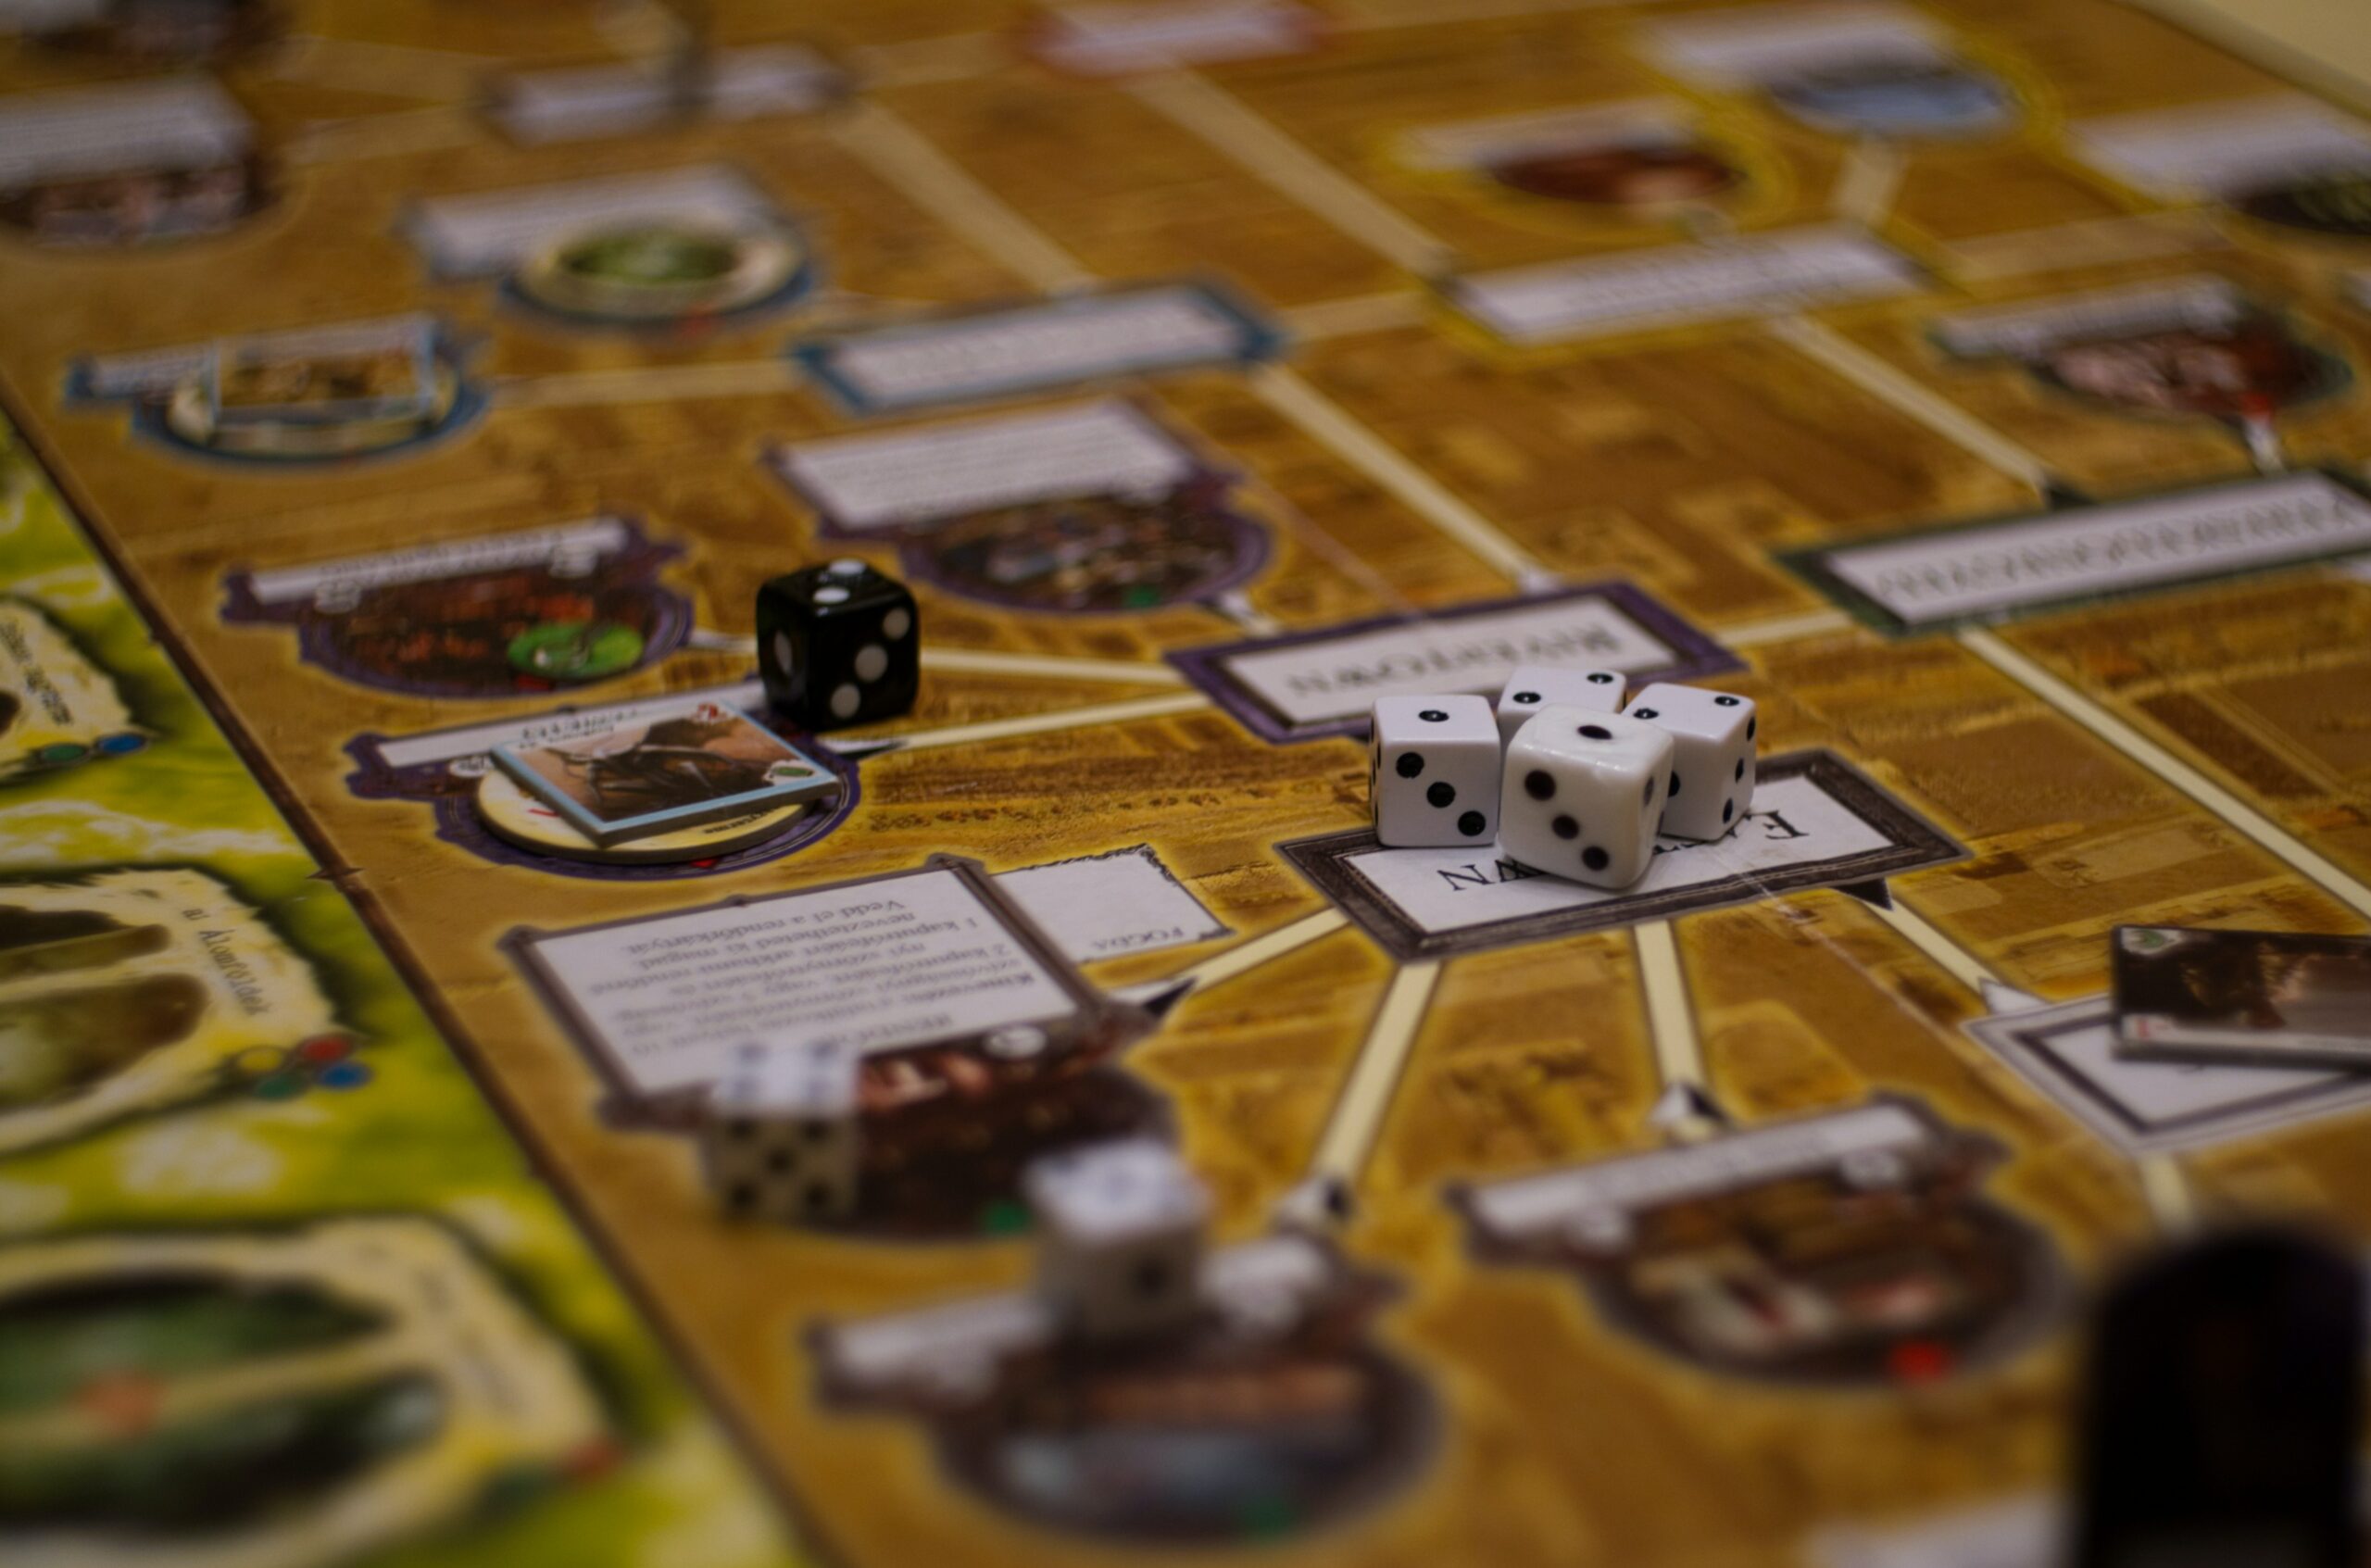 Fantasy Board Games Transport You to Mythical Realms